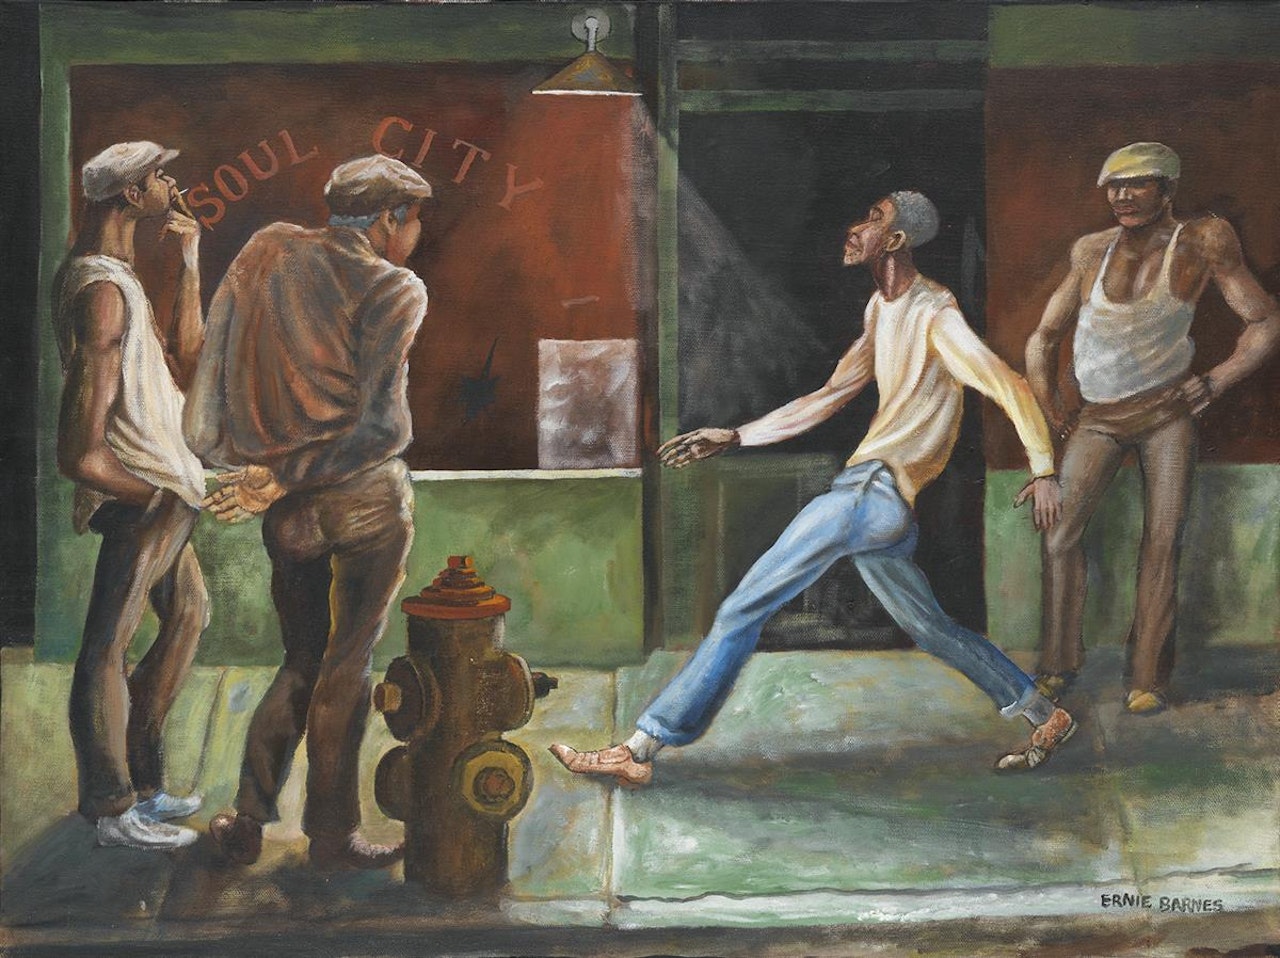 New Shoes by Ernie Barnes